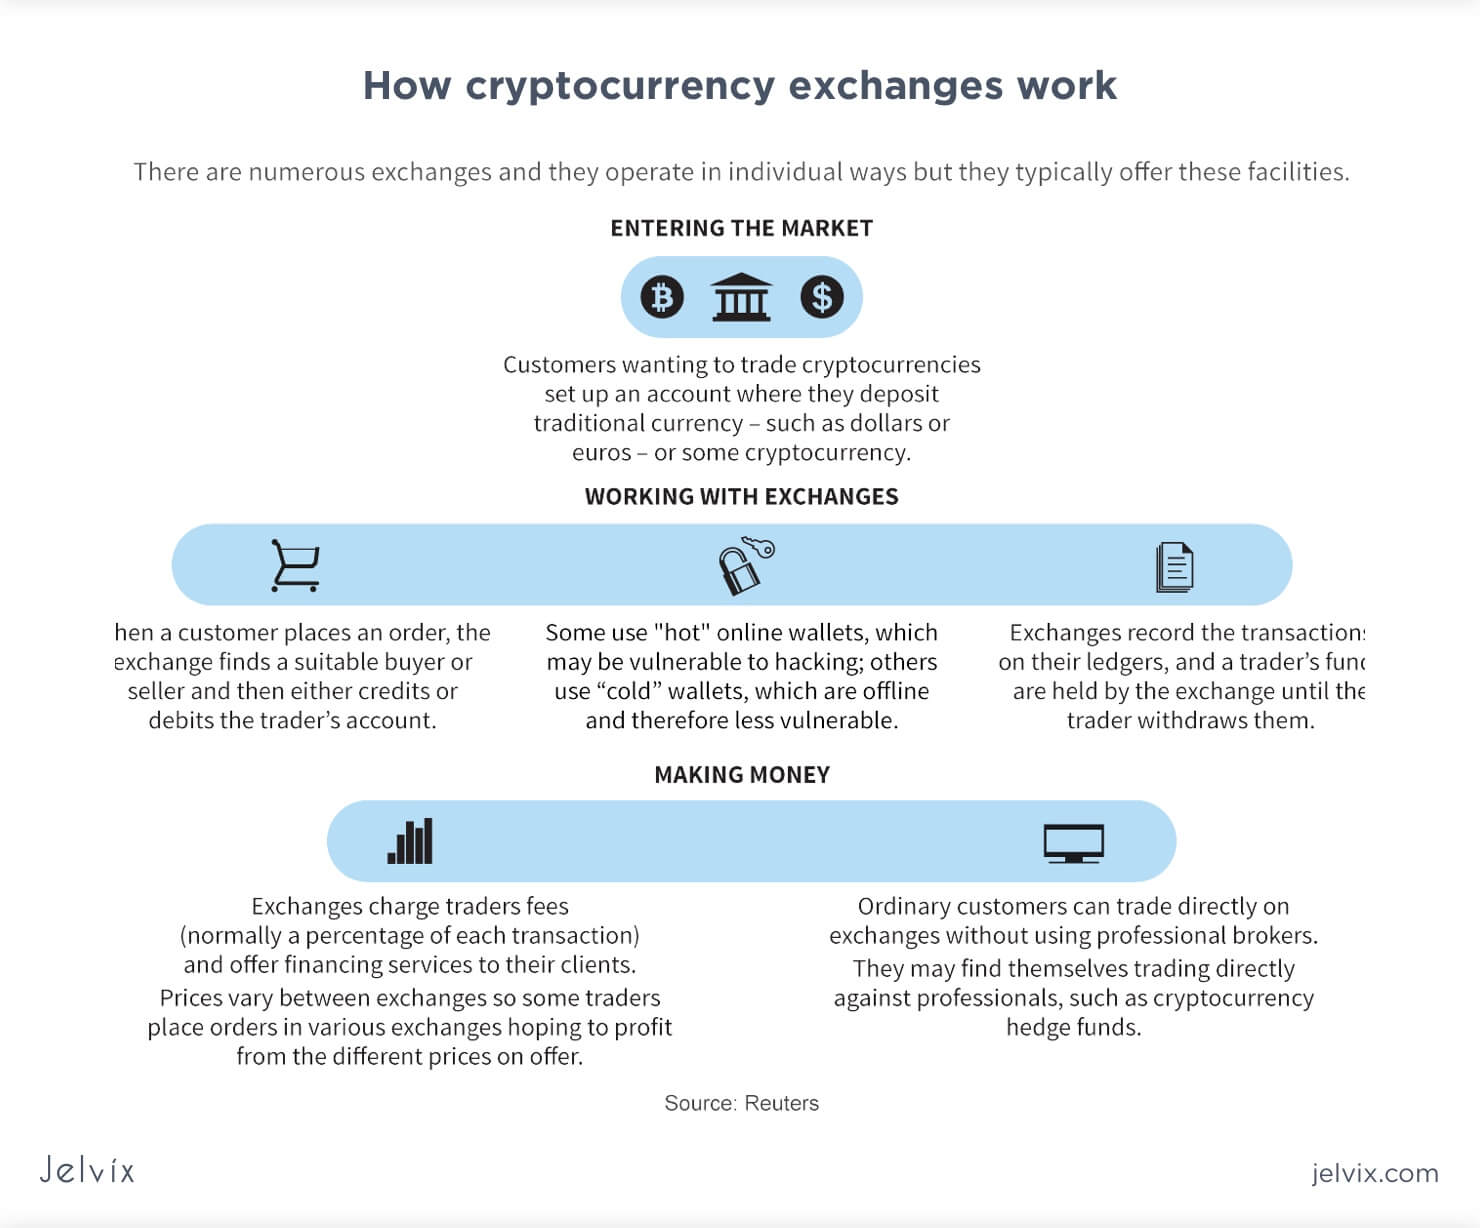 make your cryptocurrency exchanges